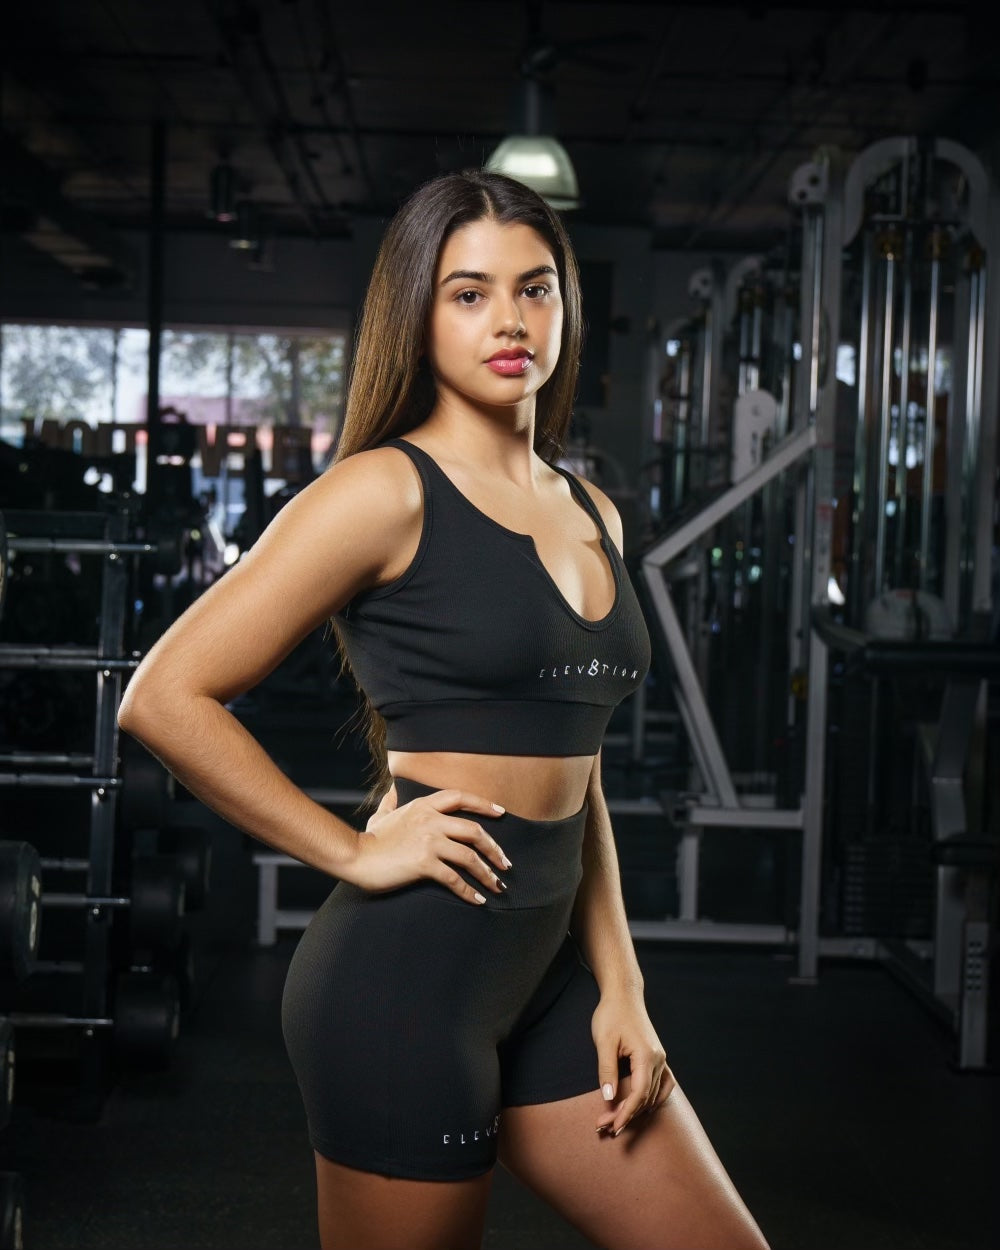 black top and bottom matching workout set for women with the Elev8tion logo